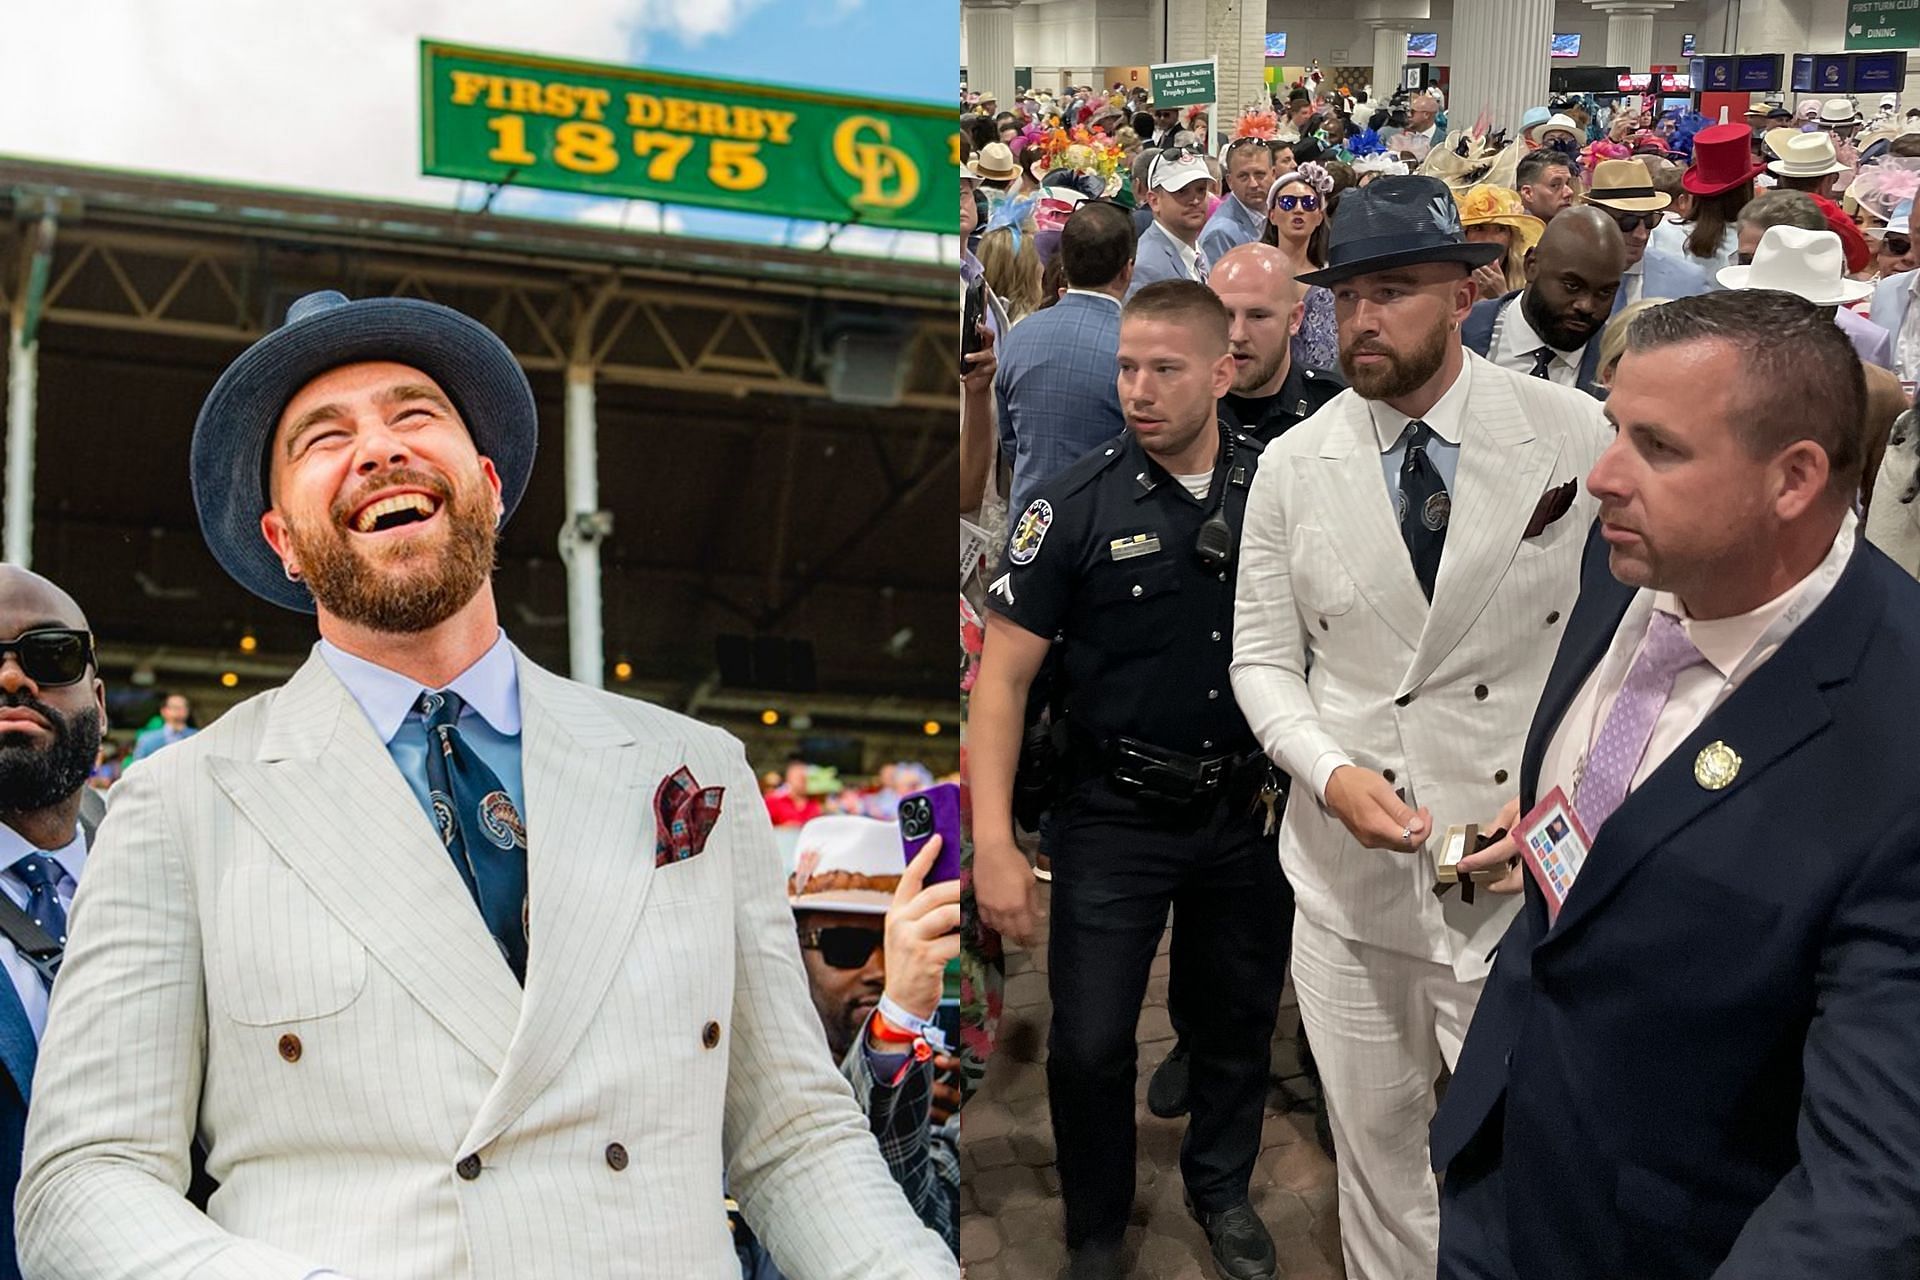 Chiefs star Travis Kelce steps out in style for Kentucky Derby at Churchill Downs